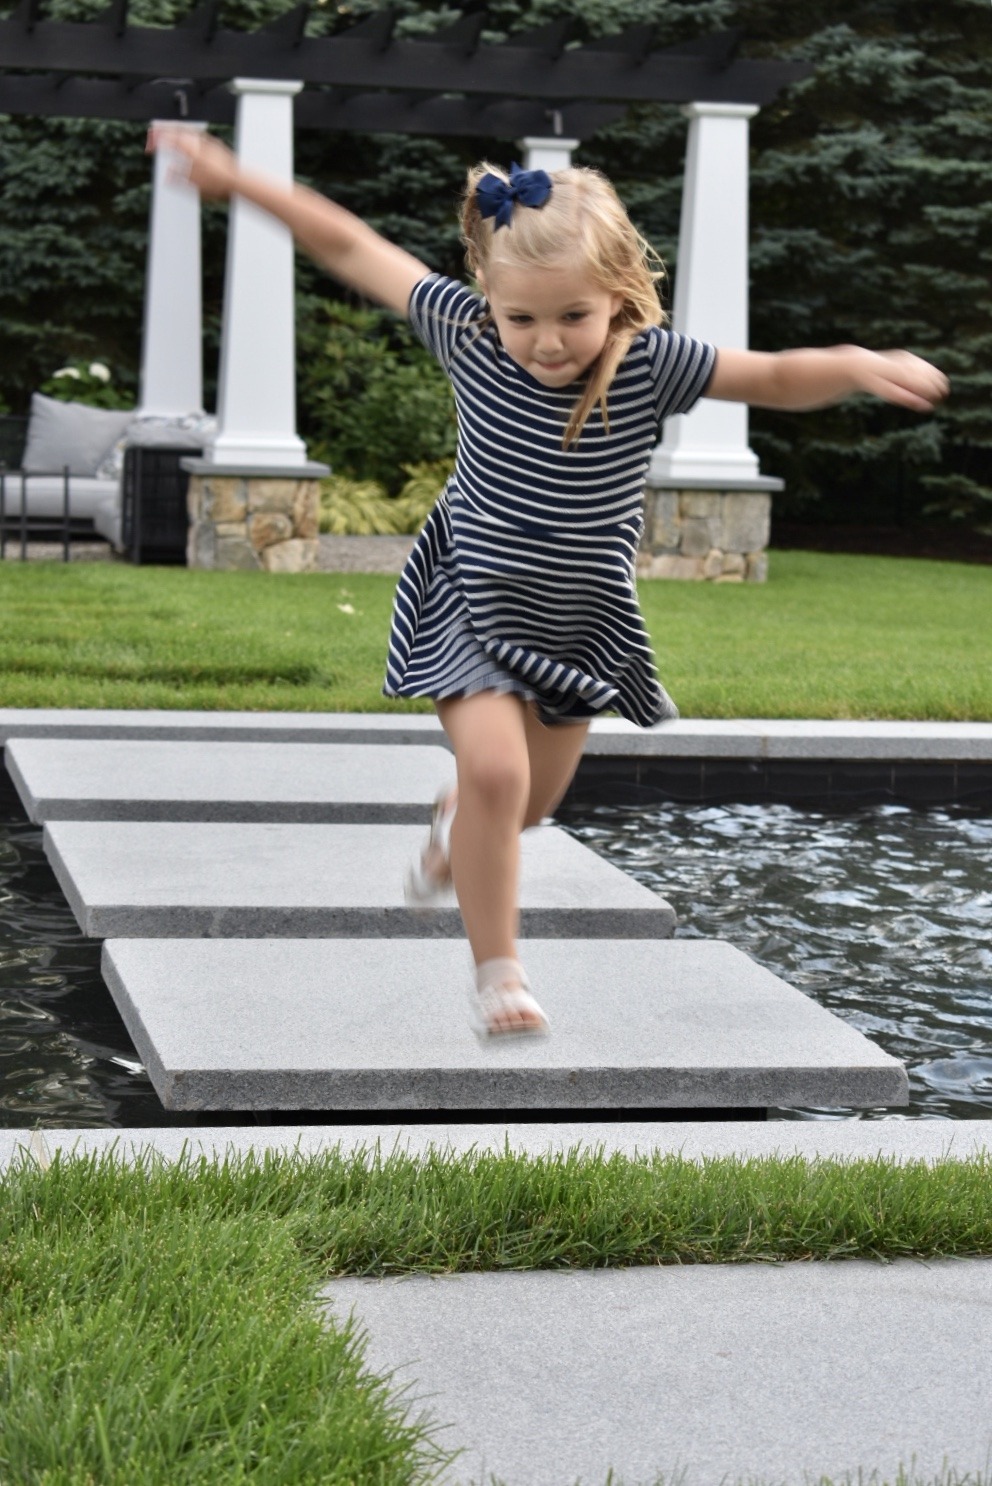 A young child joyfully balances on stepping stones across a water feature in a garden, wearing a striped dress, with trees and a pergola backdrop.